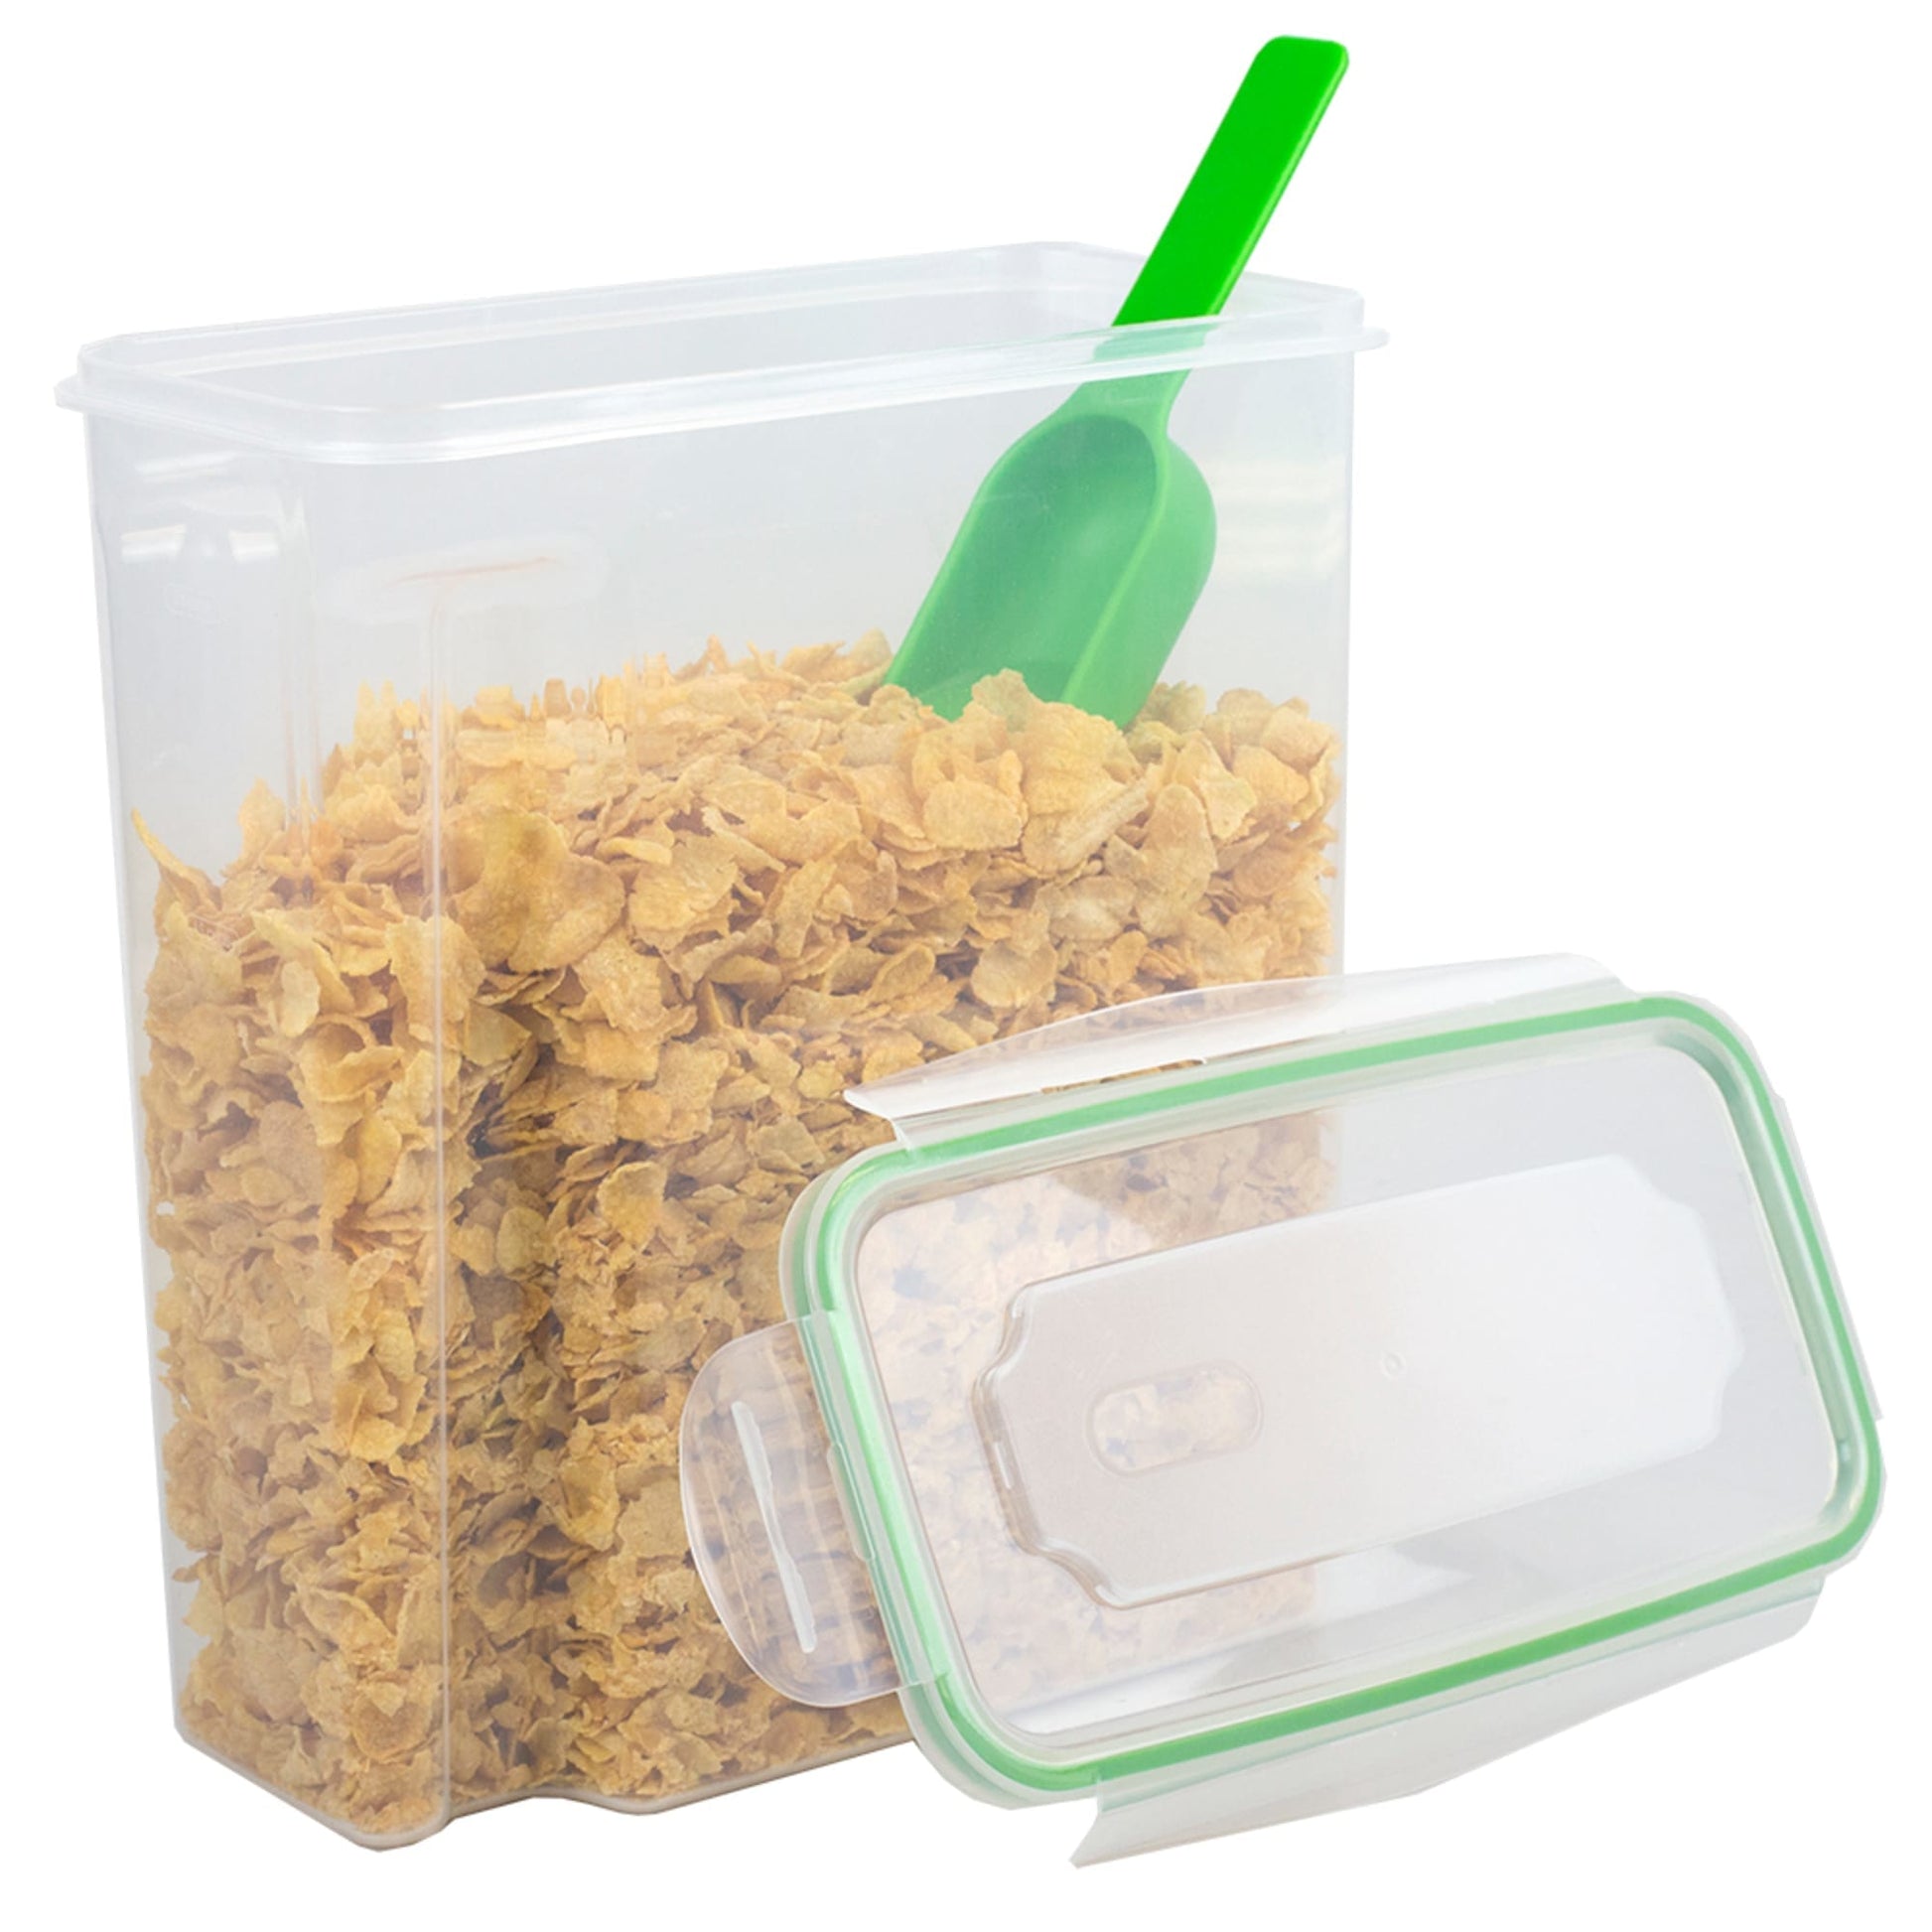 Kitchen Details Medium 5 L Plastic Airtight Cereal Container with Scooper